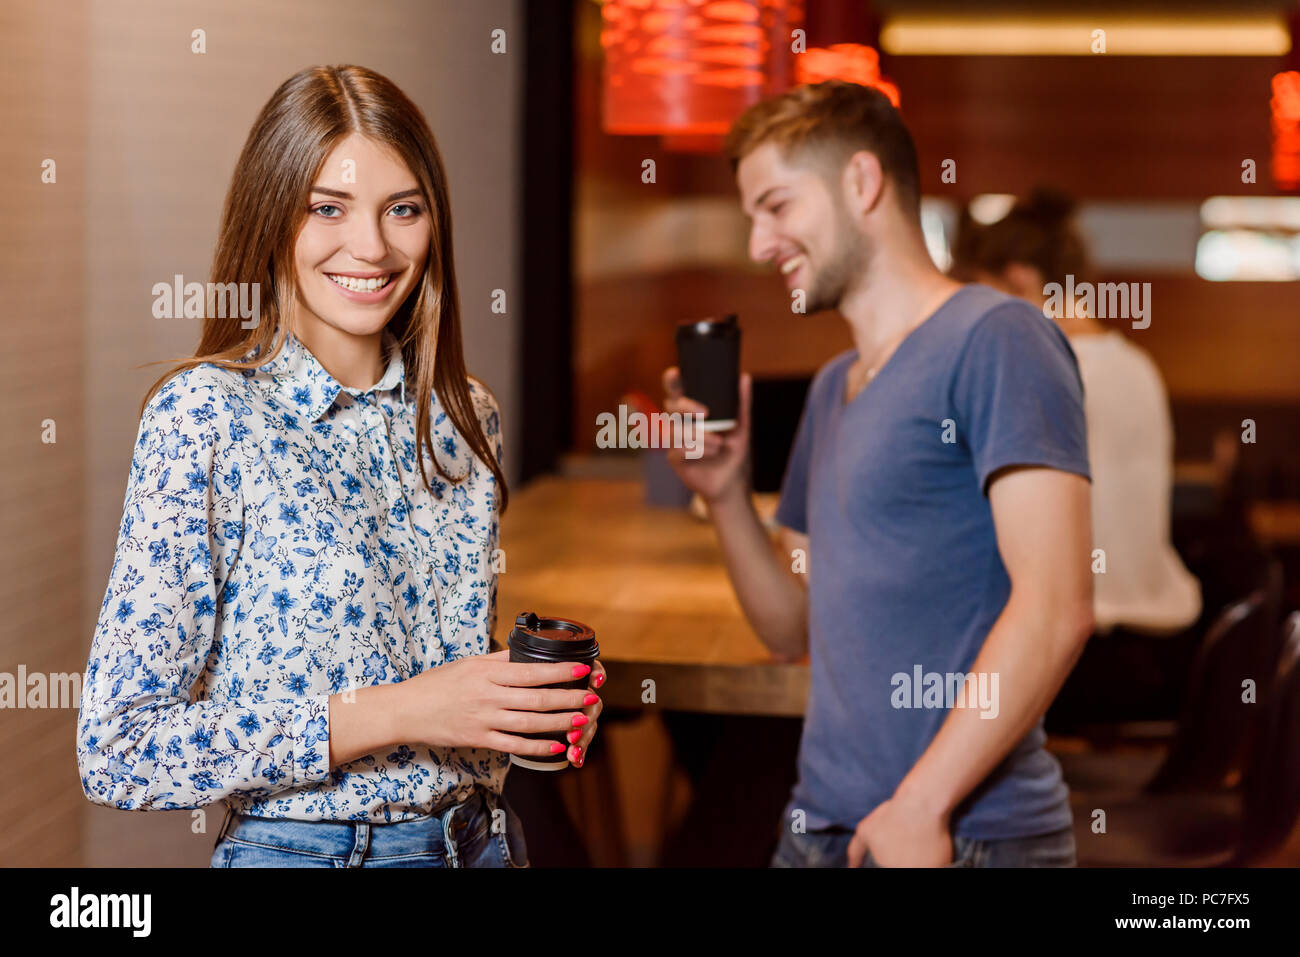 Front view of gorgeous young woman posing, looking at camera and smiling. Smiling man taking photo of his friend using phone. Positive girl holding black paper cup of coffee. Cafe interior. Stock Photo